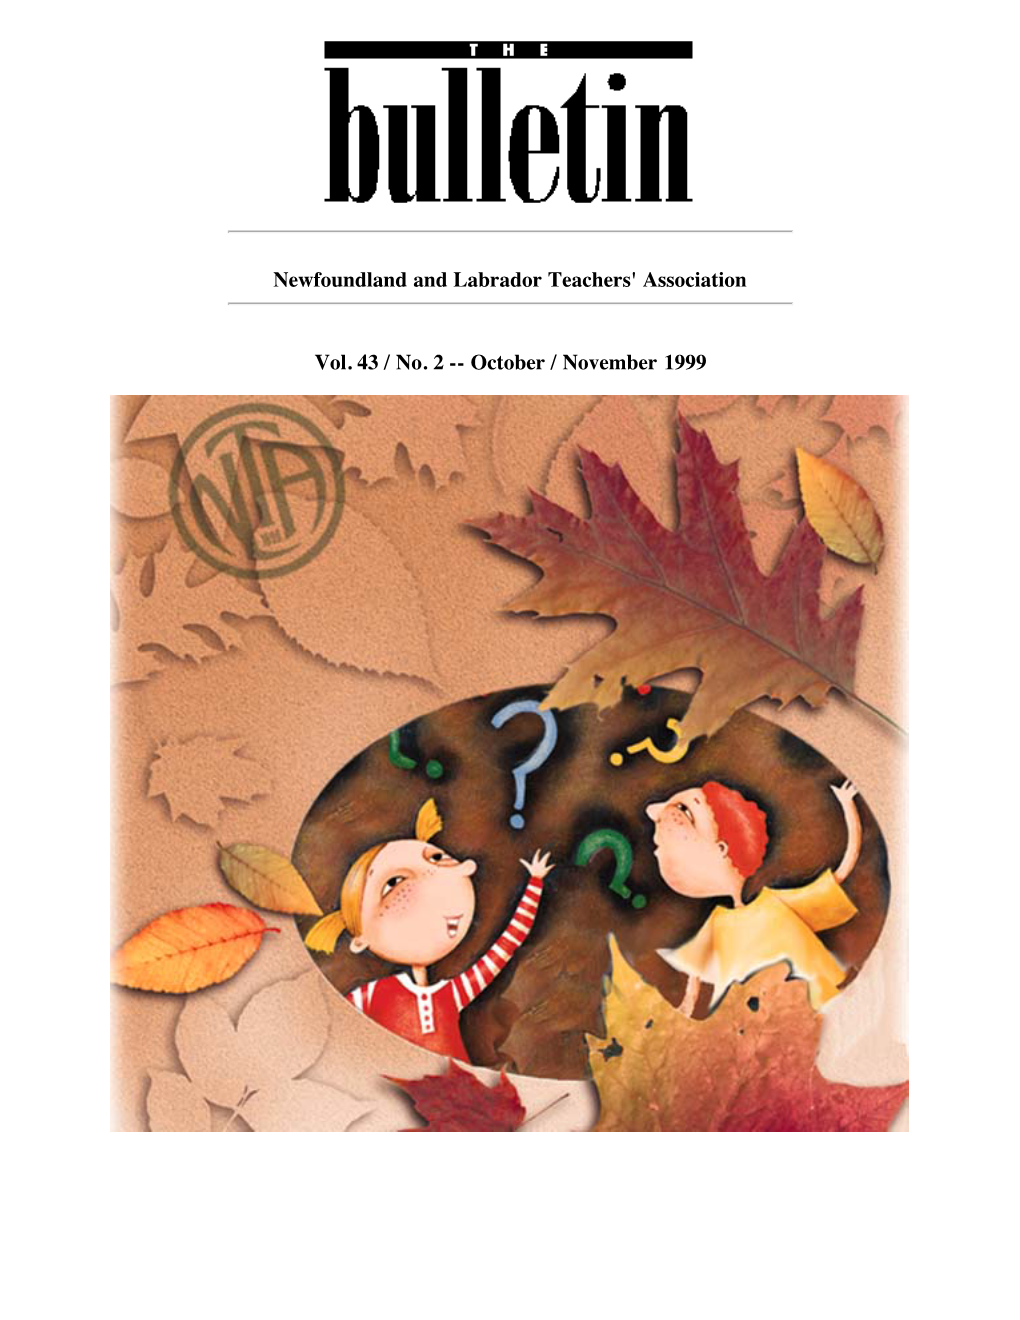 November 1999 Issue of the Bulletin from the Newfoundland And